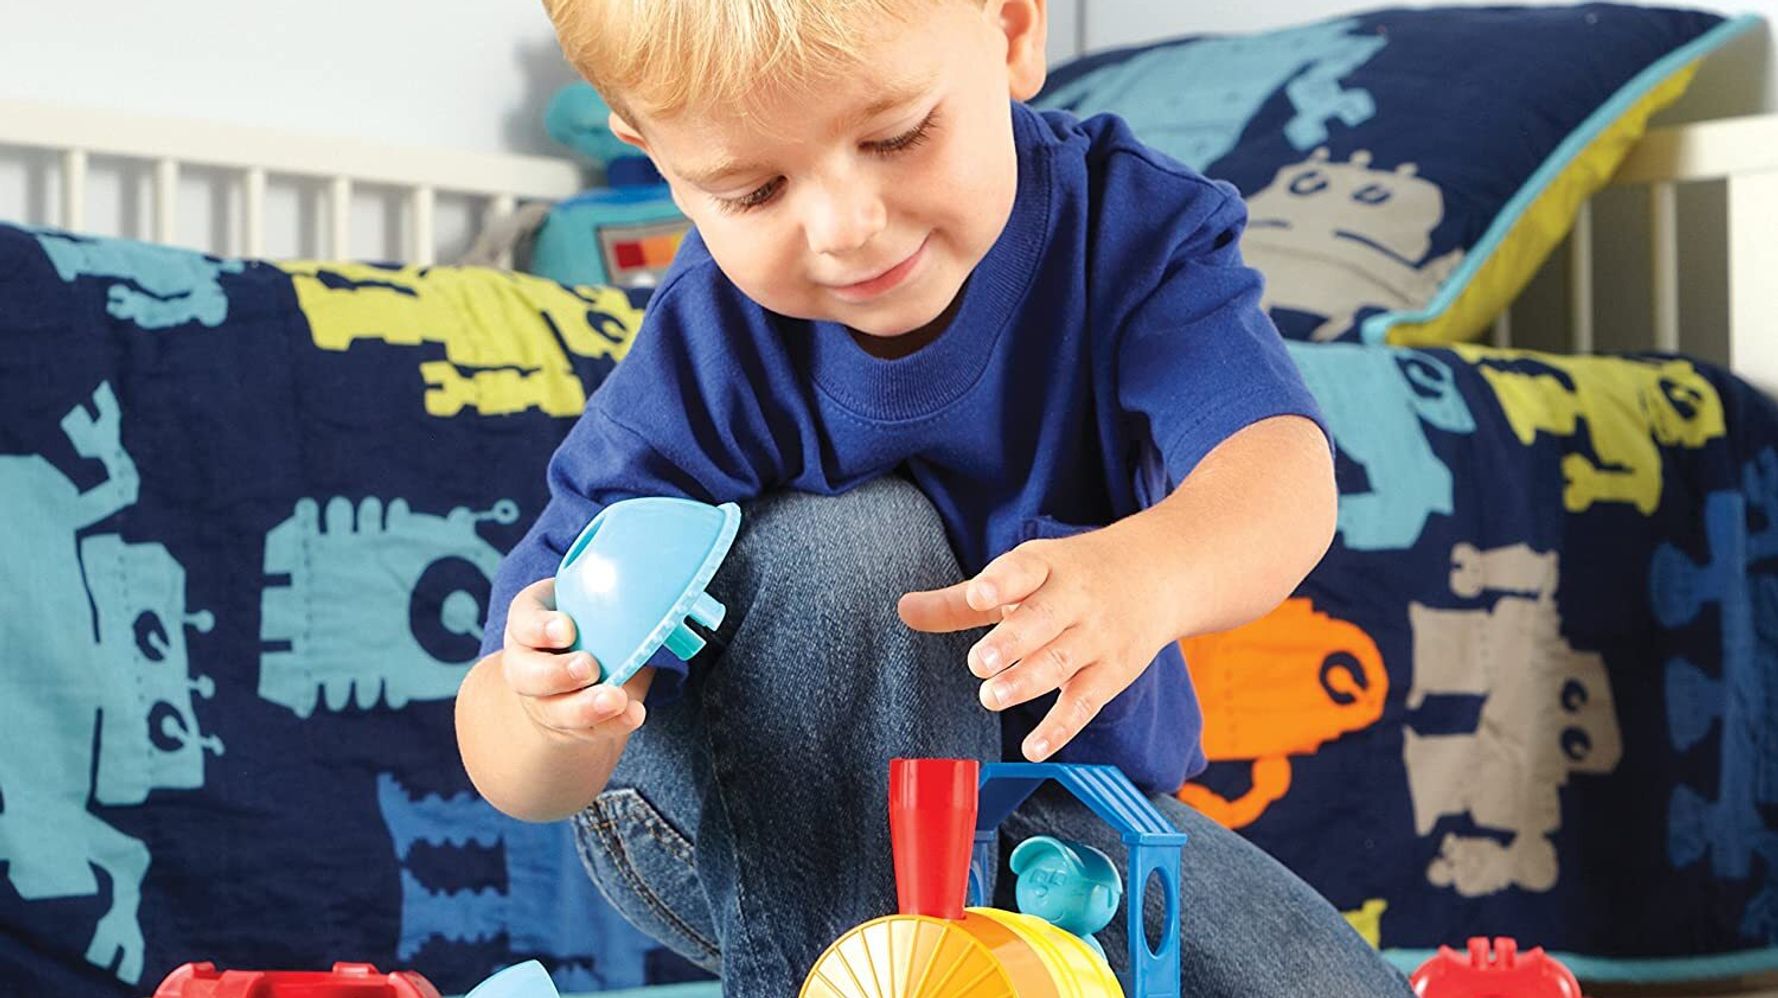 26 Gifts That Make Great Toddler Birthday Presents